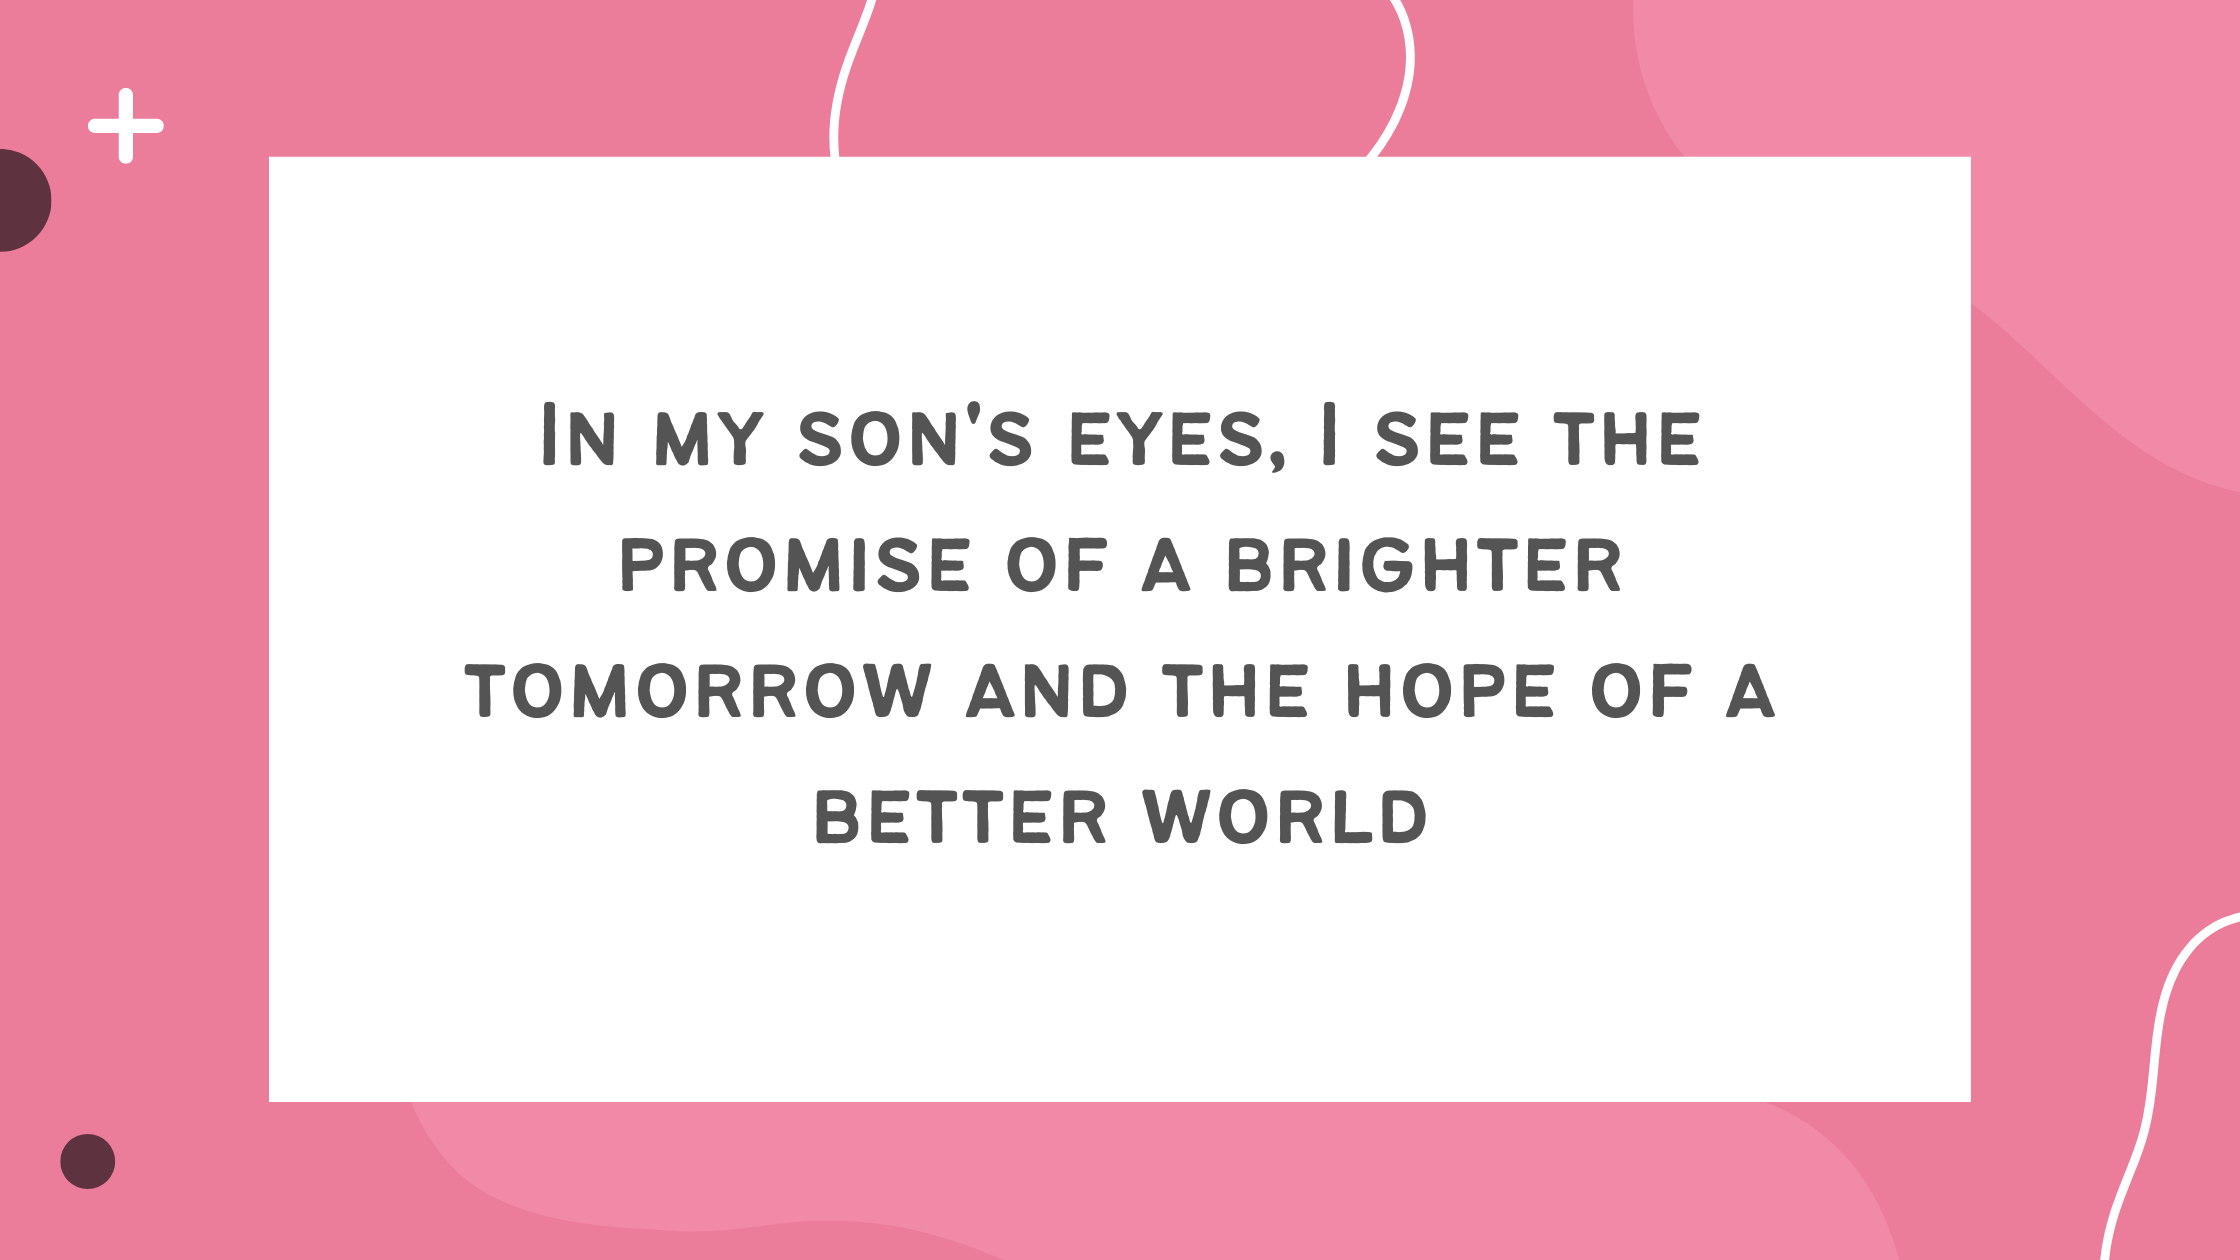 50 Heartwarming Mother and Son Bonding Quotes: Celebrating an Unbreakable Connection